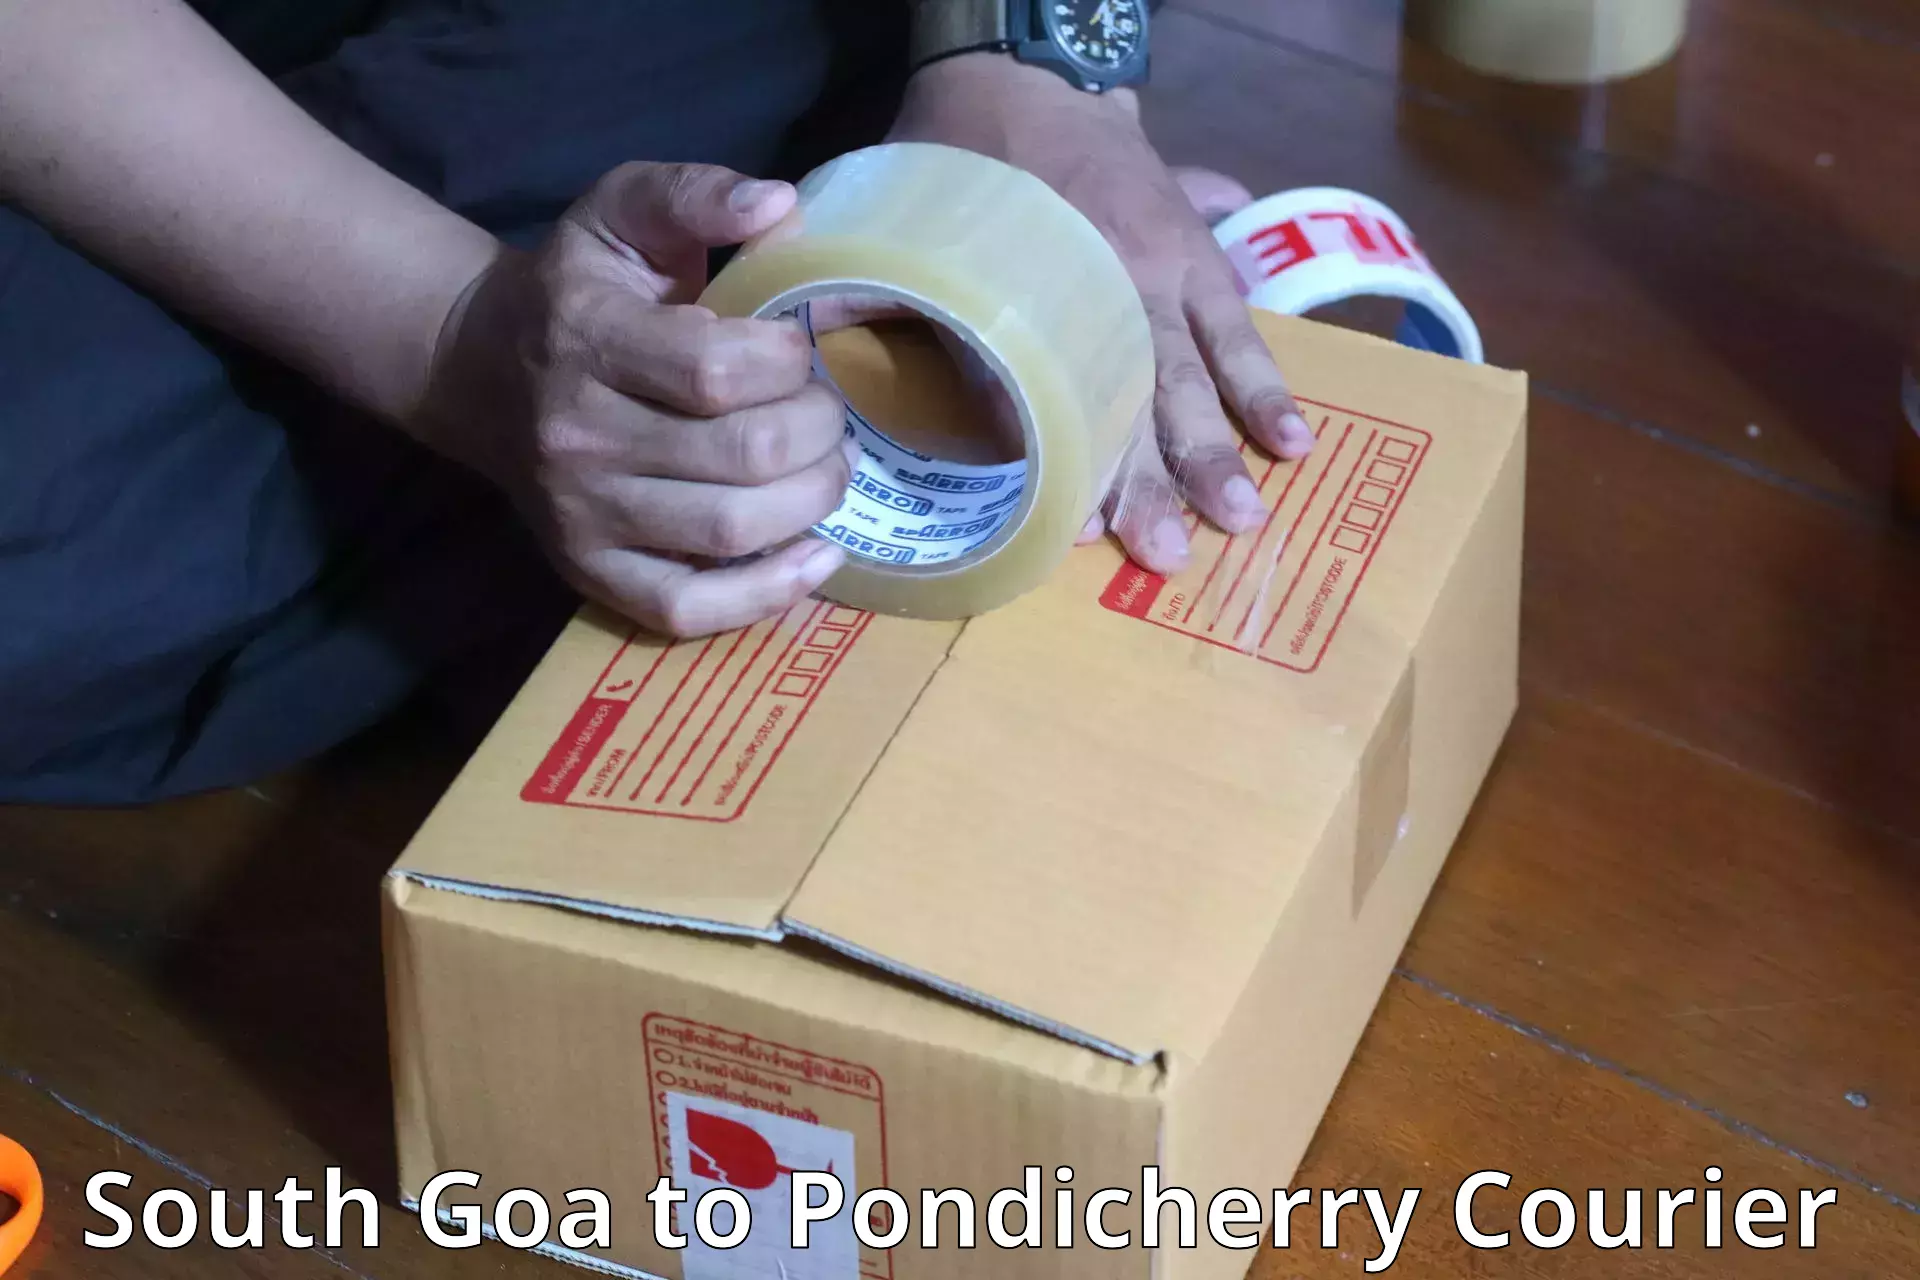 Luggage delivery app South Goa to Pondicherry